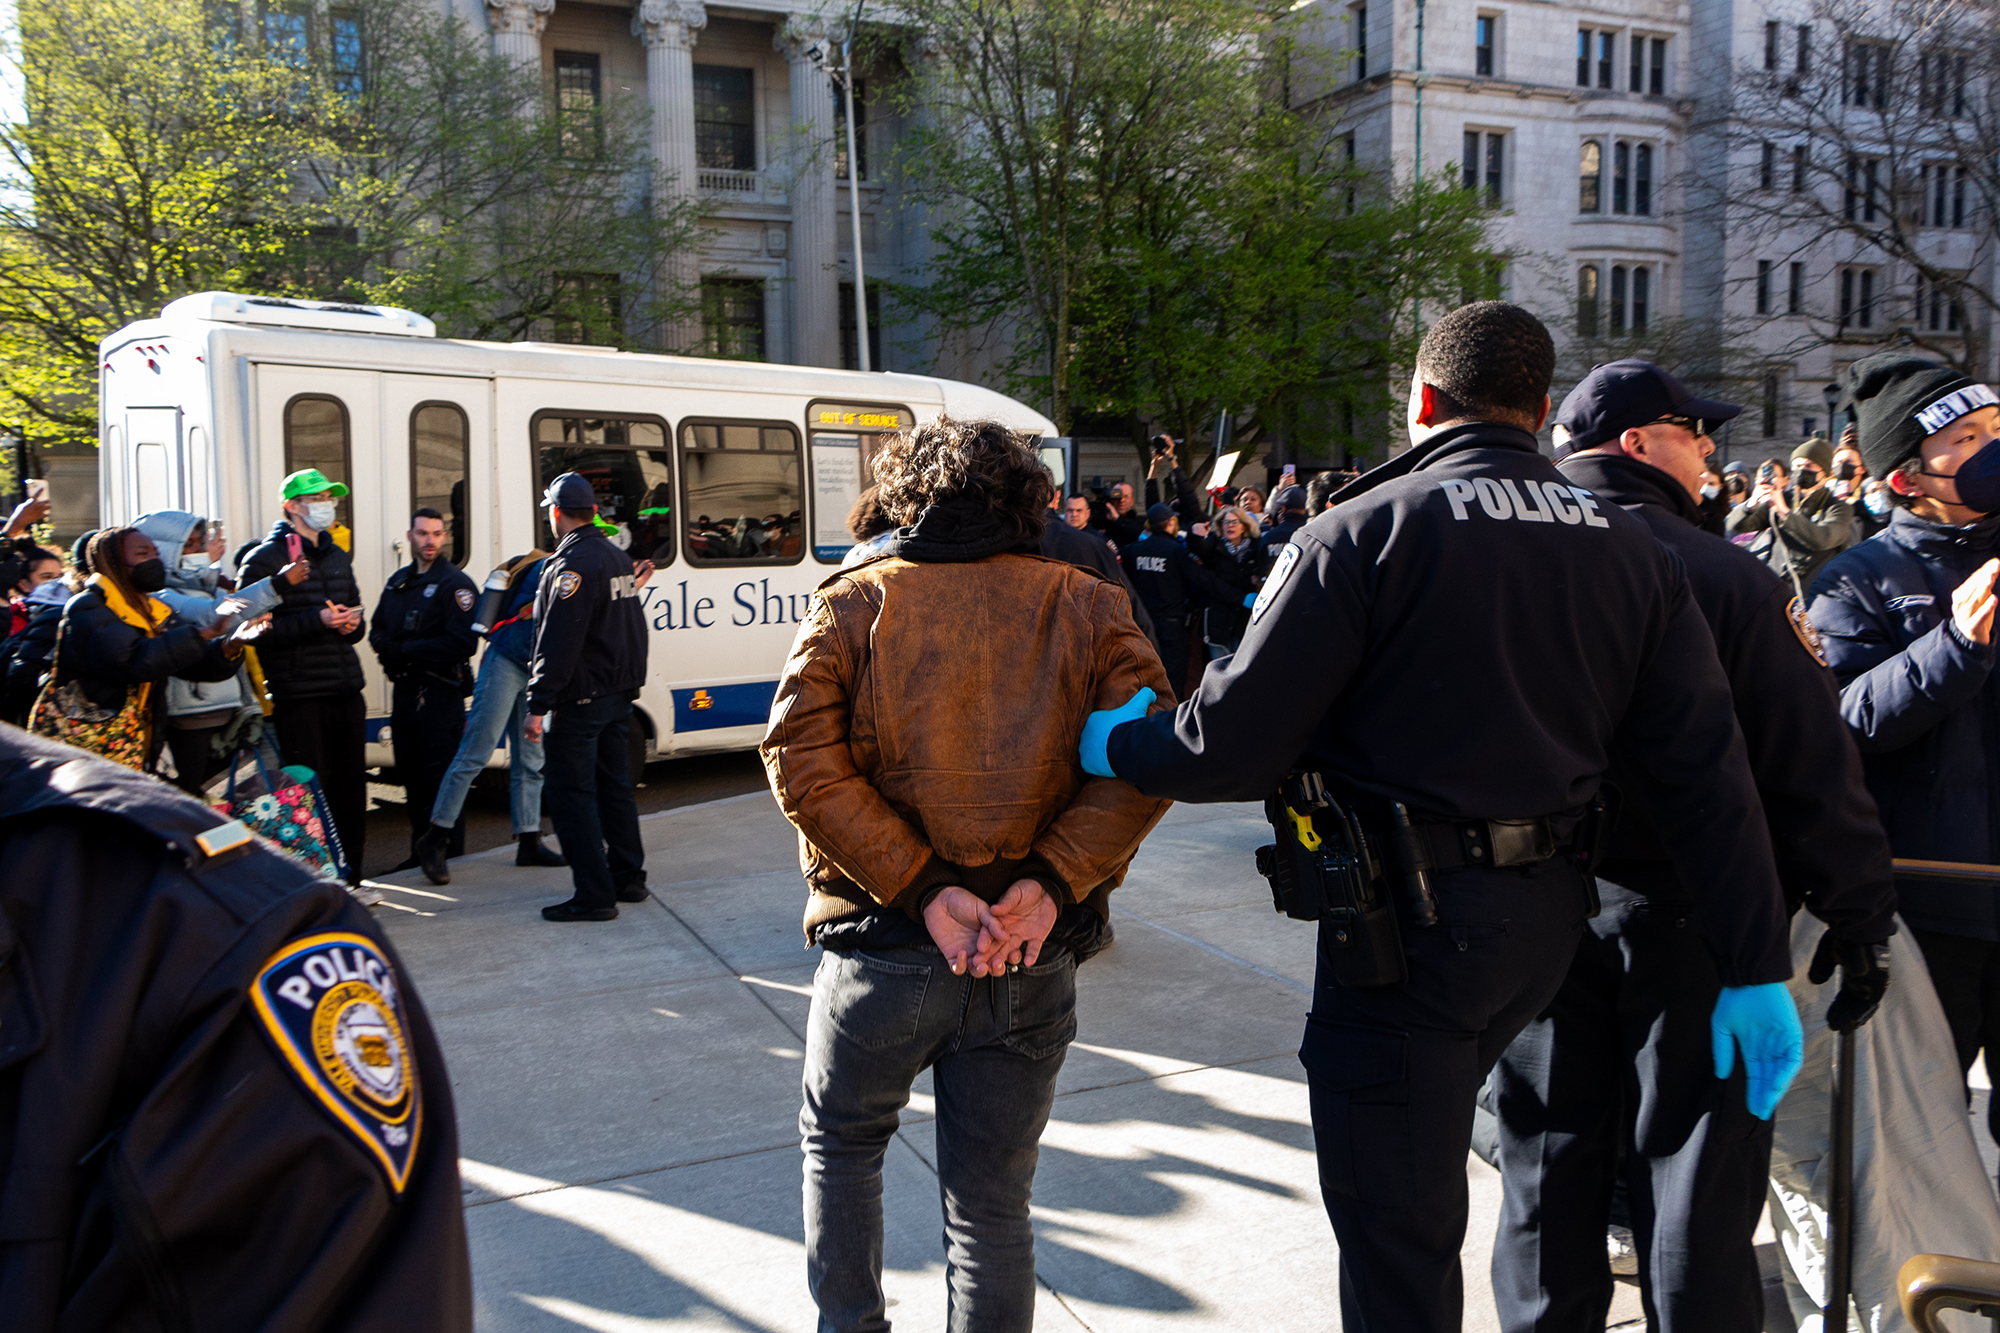 Yale Police Department (YPD) arrested protesters at Yale University in New Haven, CT, on April 22.